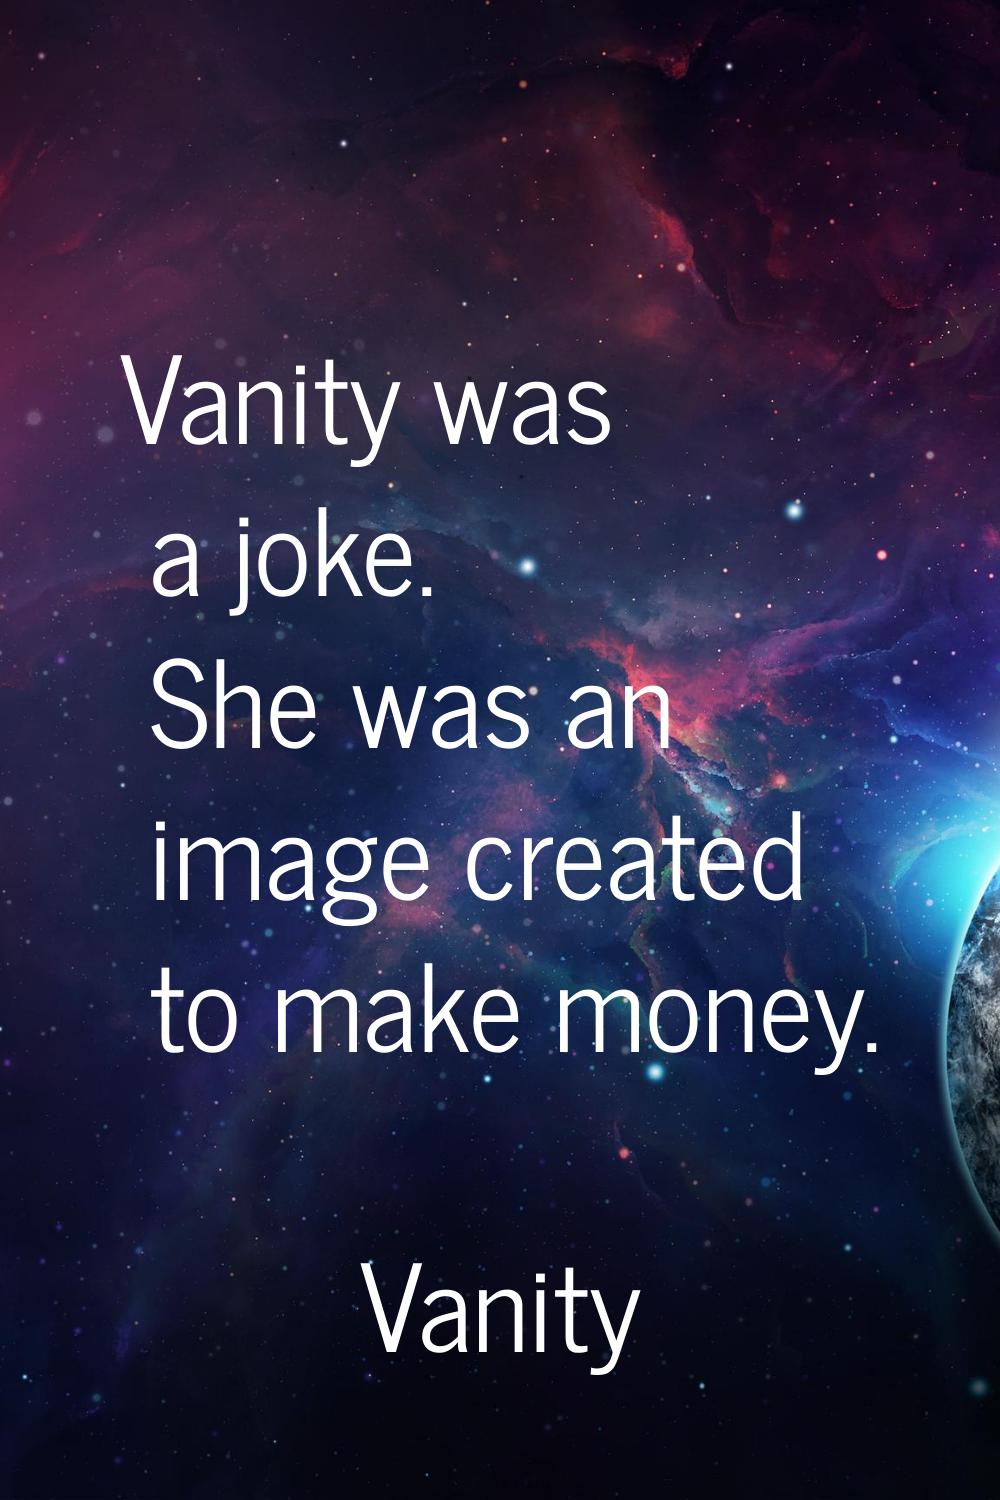 Vanity was a joke. She was an image created to make money.